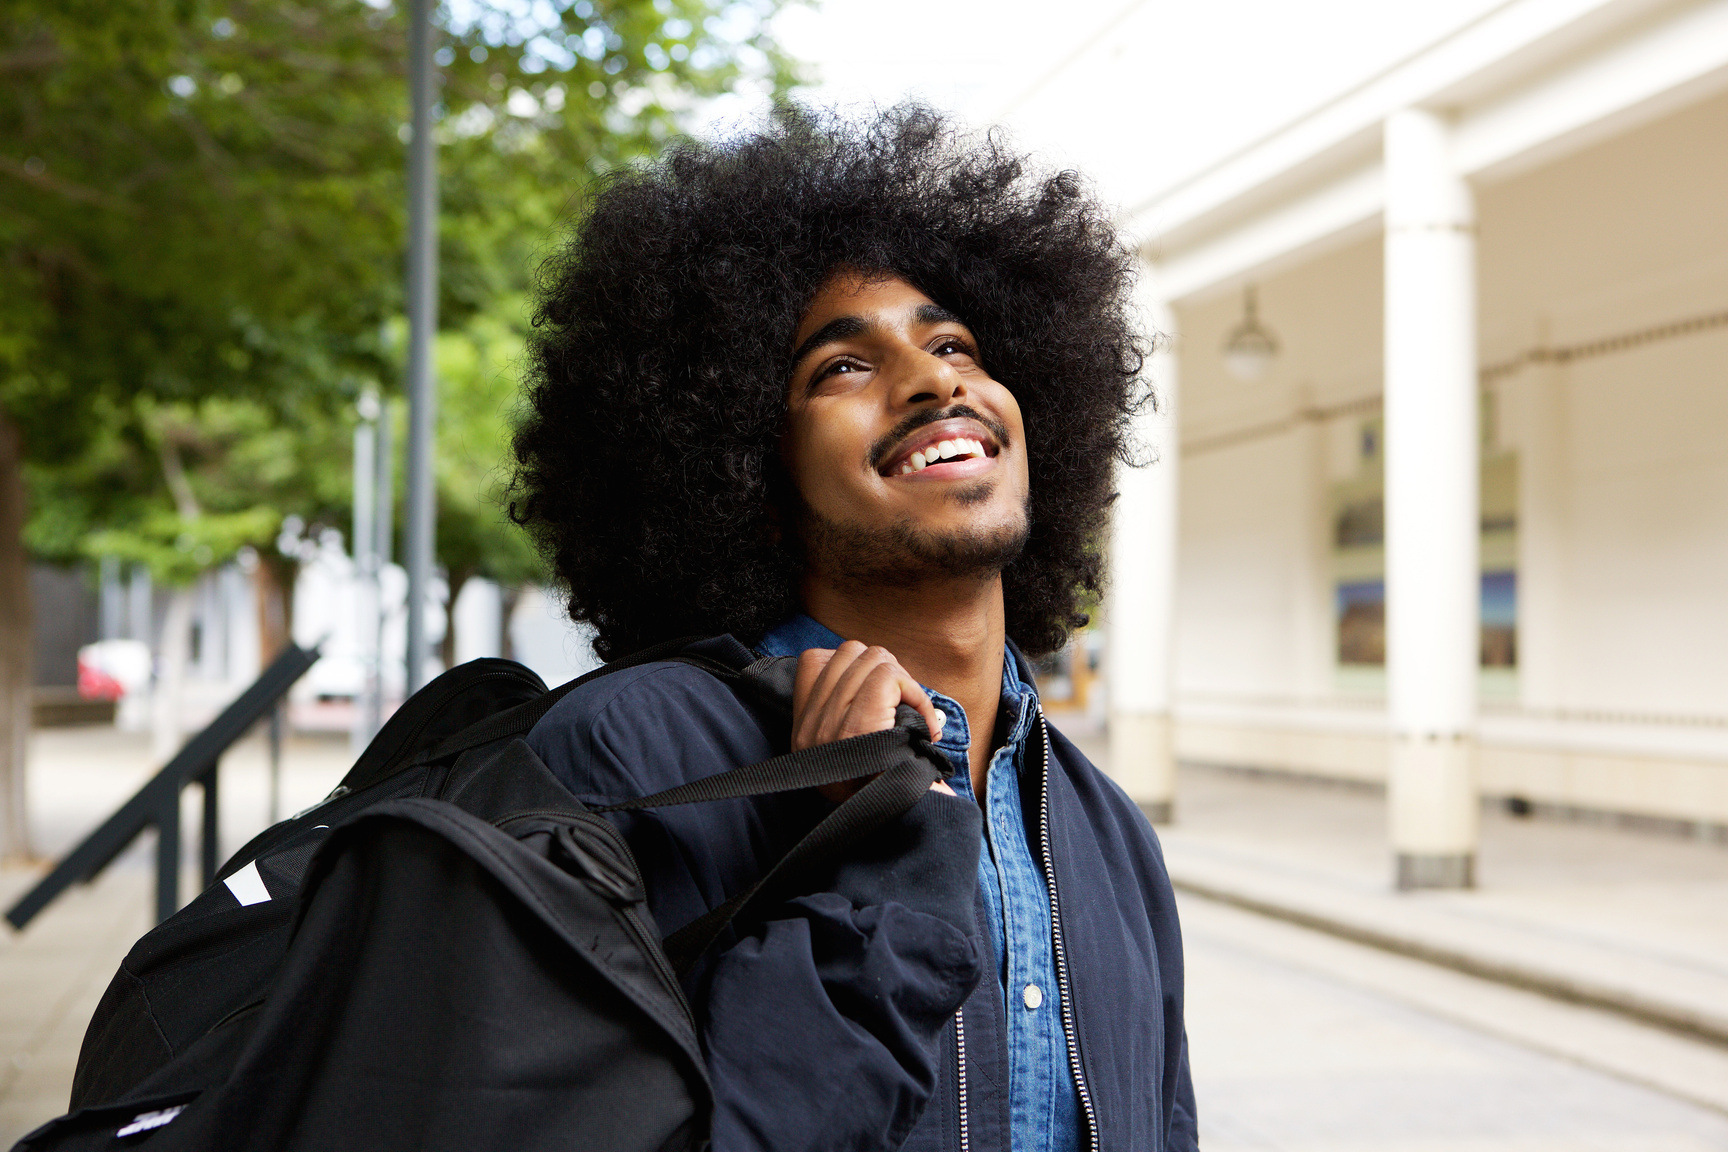 Smiling Black Student with Afro